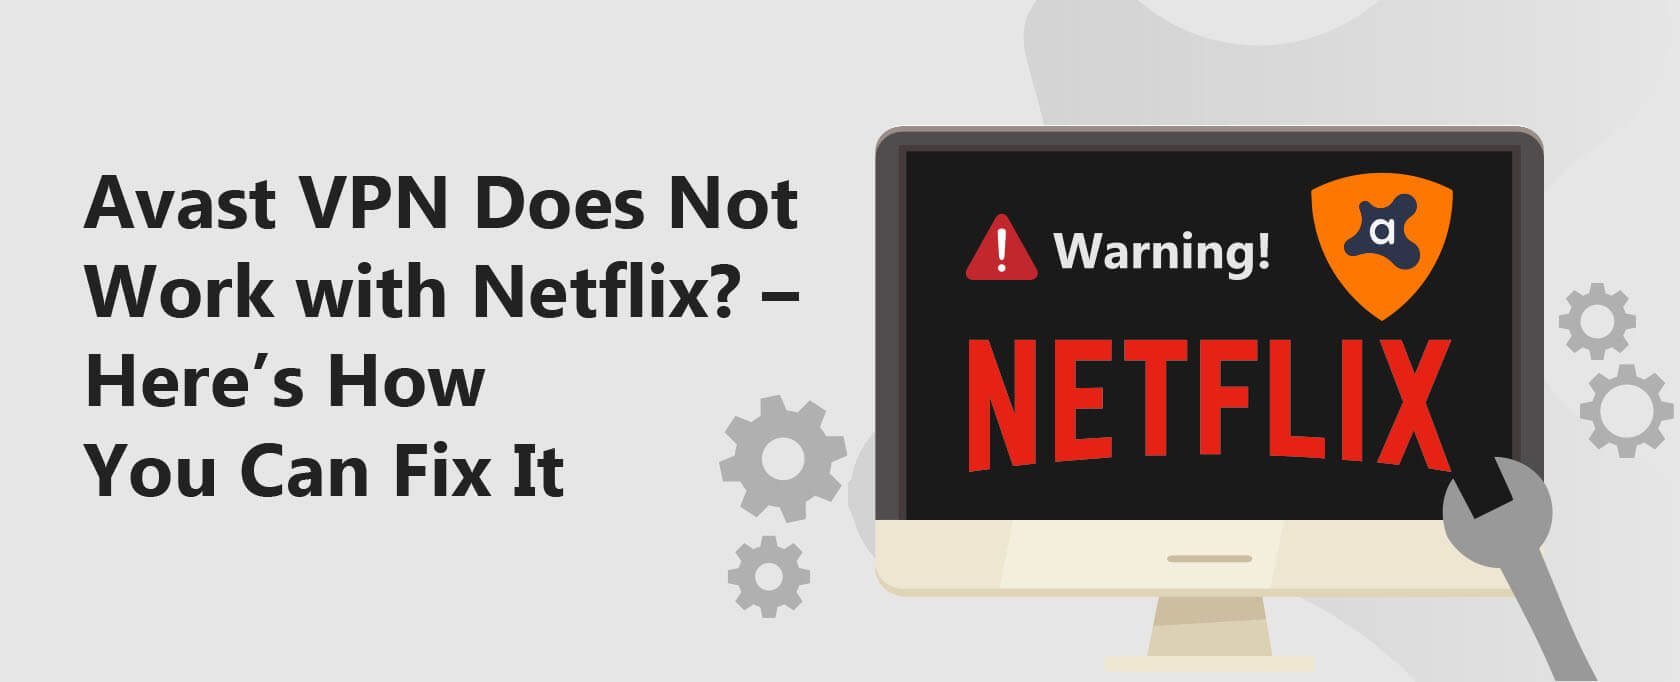 Avast VPN Does Not Work With Netflix